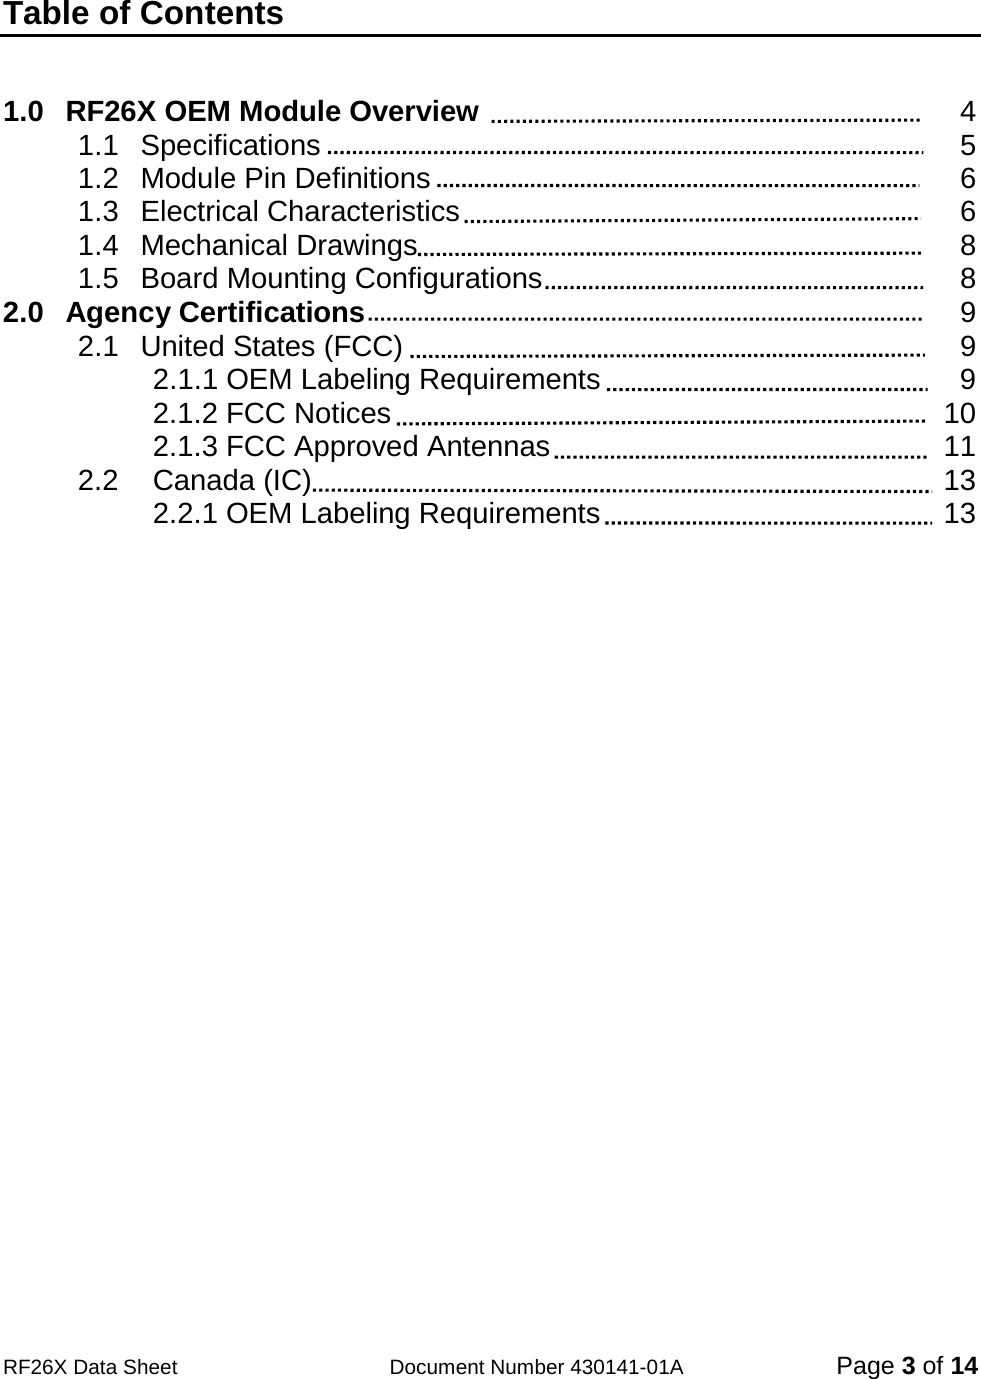                                            RF26X Data Sheet                  Document Number 430141-01A  Page 3 of 14  Table of Contents      1.0 RF26X OEM Module Overview                 4 1.1 Specifications               5 1.2 Module Pin Definitions              6 1.3 Electrical Characteristics             6 1.4 Mechanical Drawings              8 1.5 Board Mounting Configurations            8 2.0 Agency Certifications               9 2.1 United States (FCC)              9  2.1.1 OEM Labeling Requirements            9  2.1.2 FCC Notices            10  2.1.3 FCC Approved Antennas          11 2.2 Canada (IC)             13  2.2.1 OEM Labeling Requirements          13    